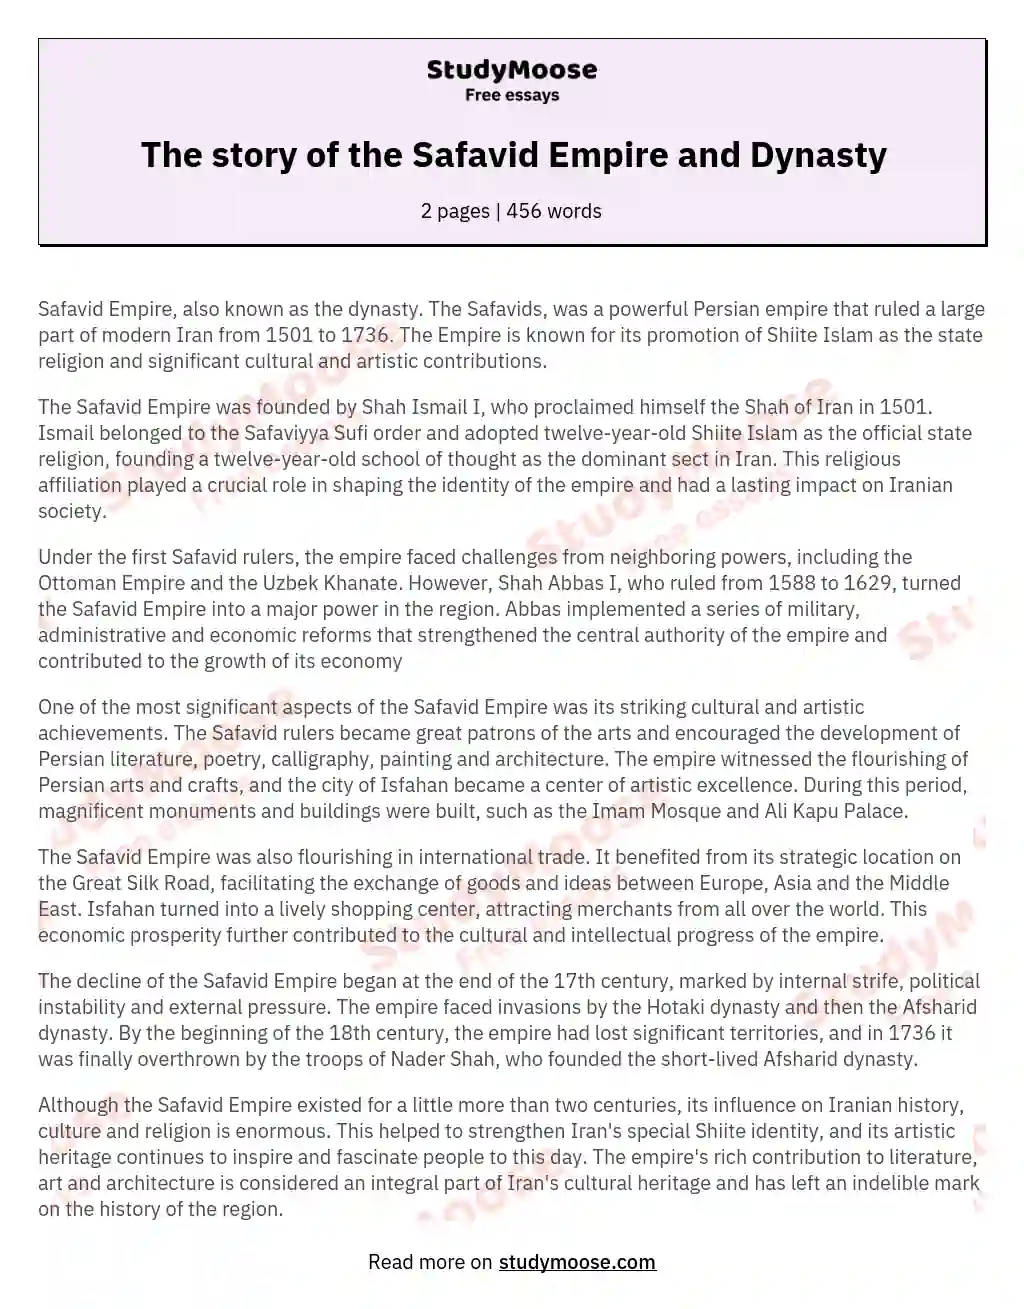 The story of the Safavid Empire and Dynasty essay